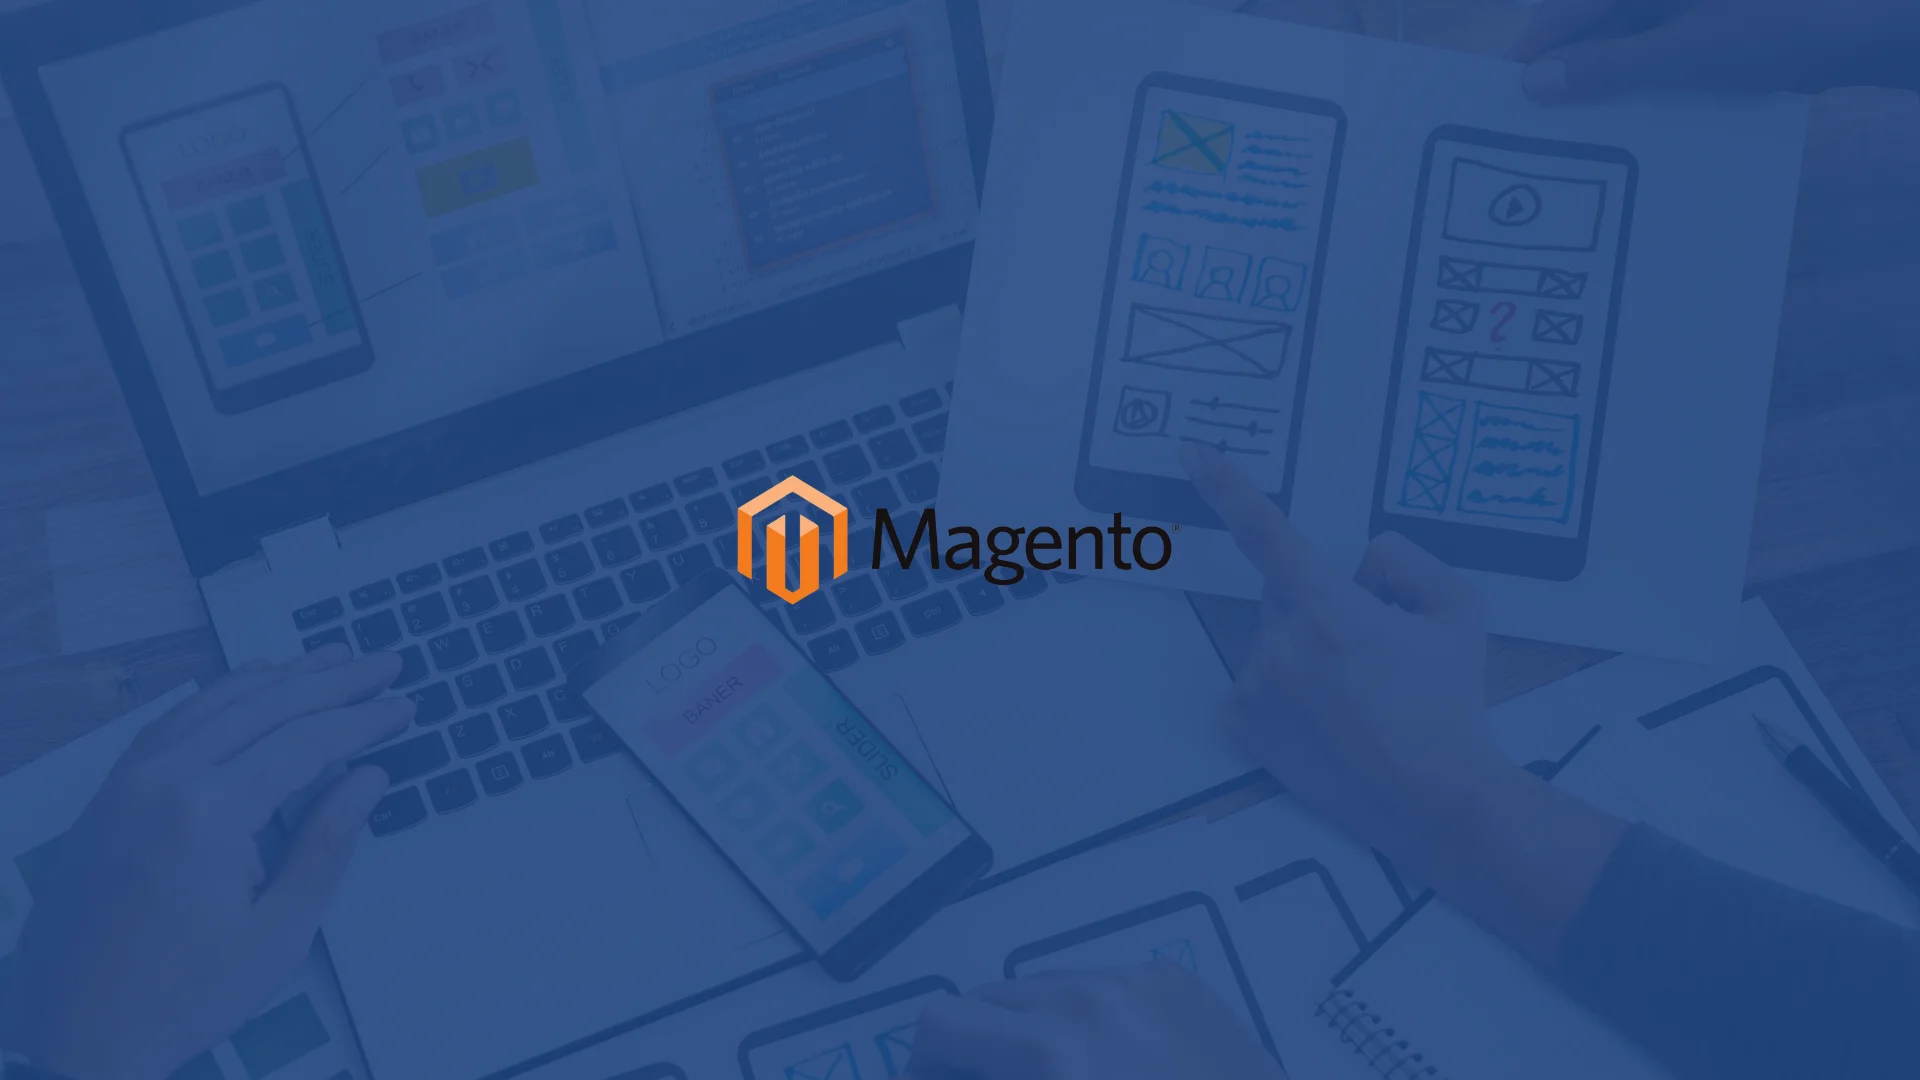 Website Redesigned with Magento capabilities for an elevated user experience